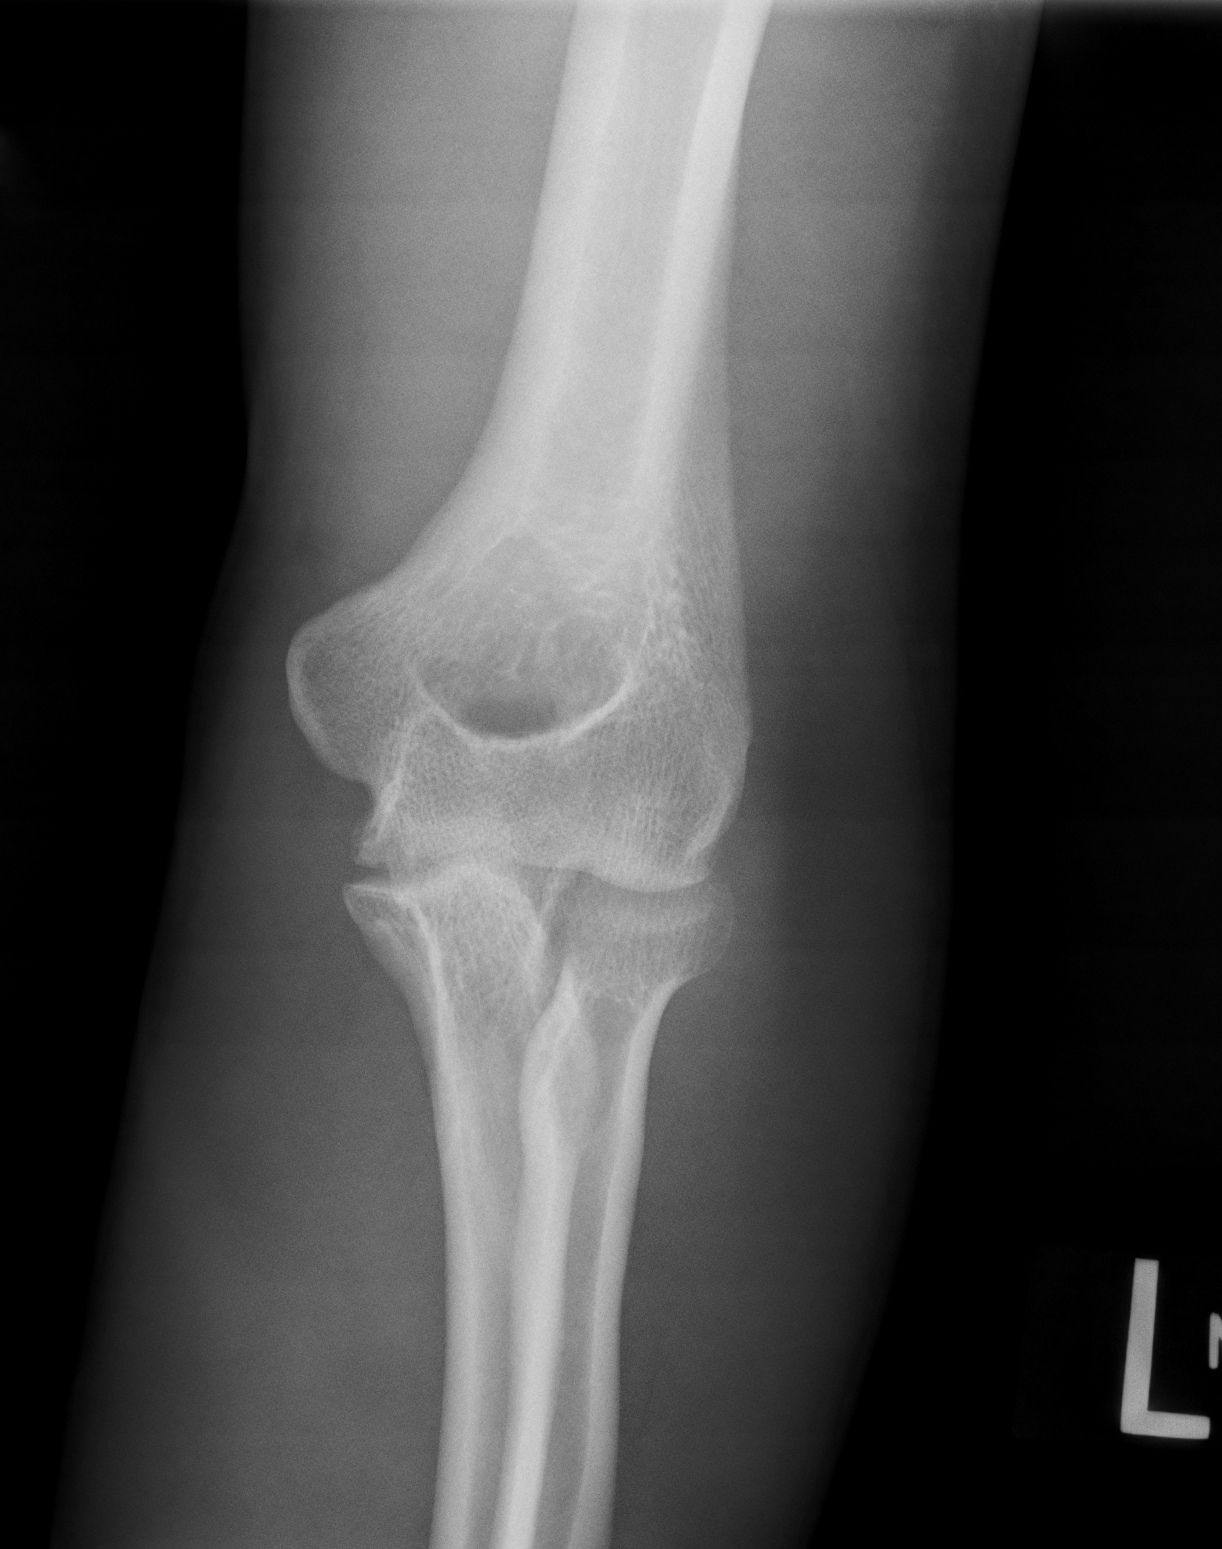 Image IQ: 23-year-old Male with Elbow Pain